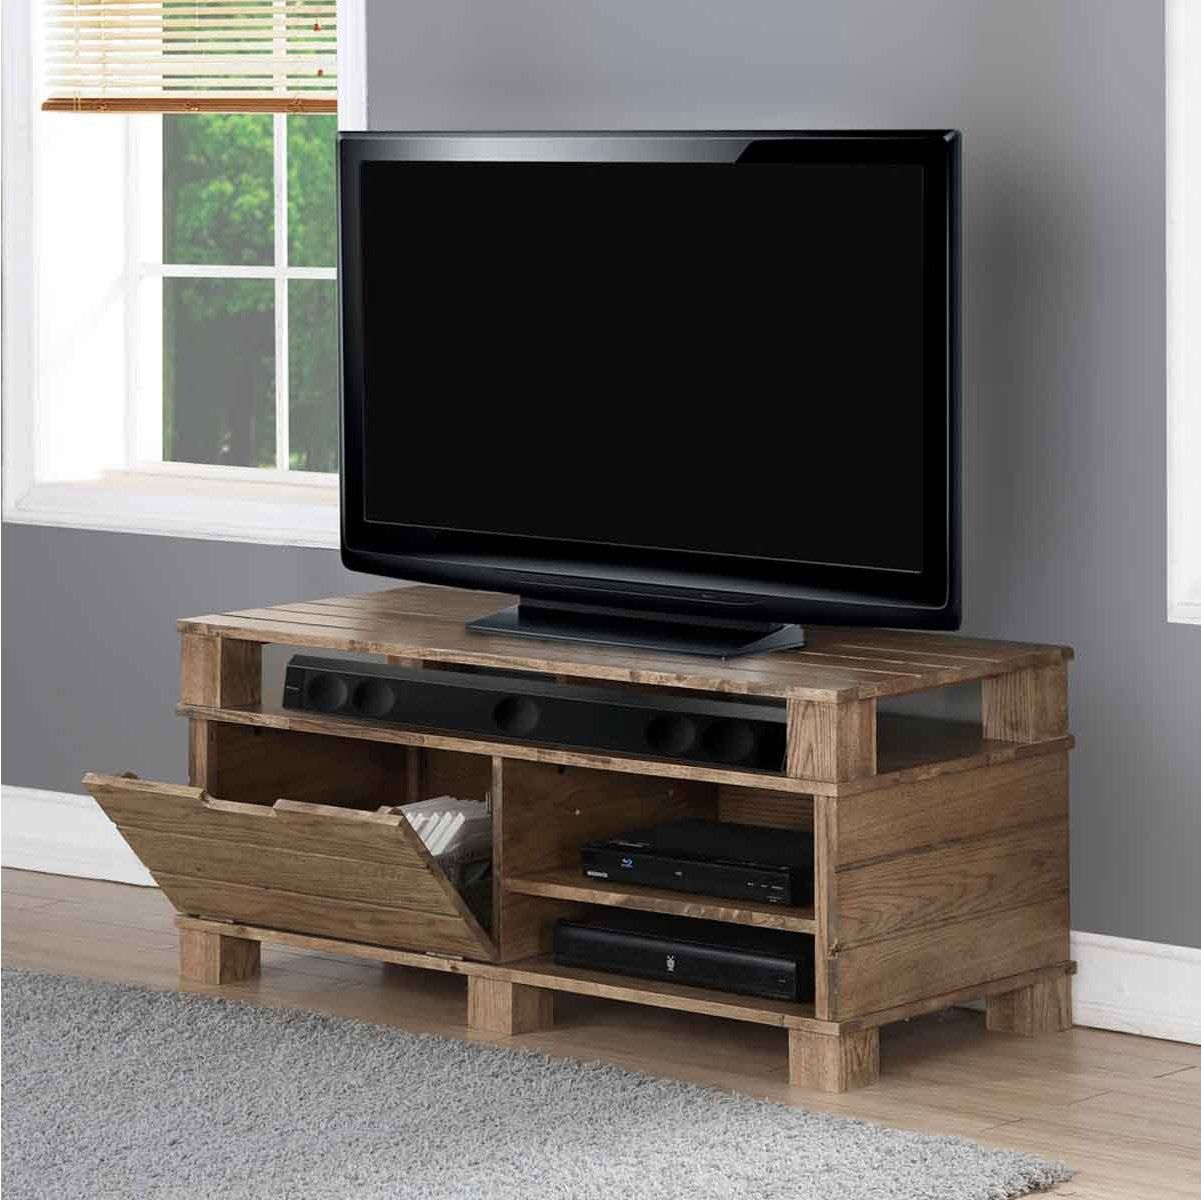 Jual Sw201 Solid Wood Rustic Oak Tv Stand For Up To 55 Inside Tv Stands For 55 Inch Tv (View 6 of 15)